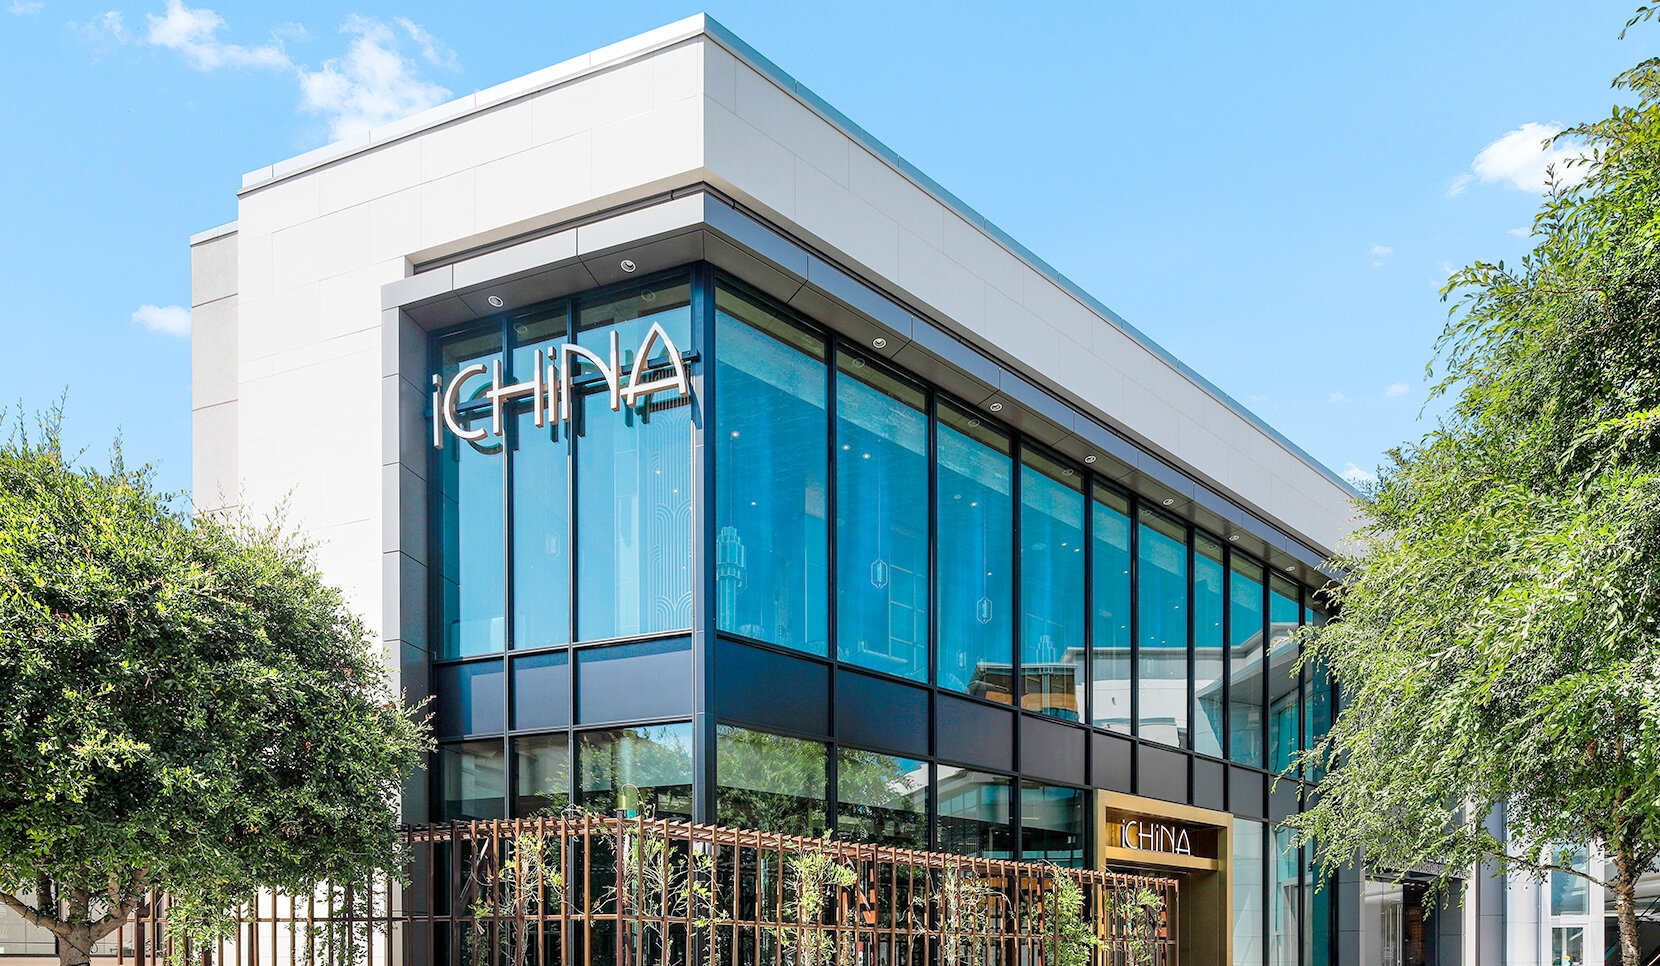 Valley Fair's swanky newcomer: iChina restaurant opens with